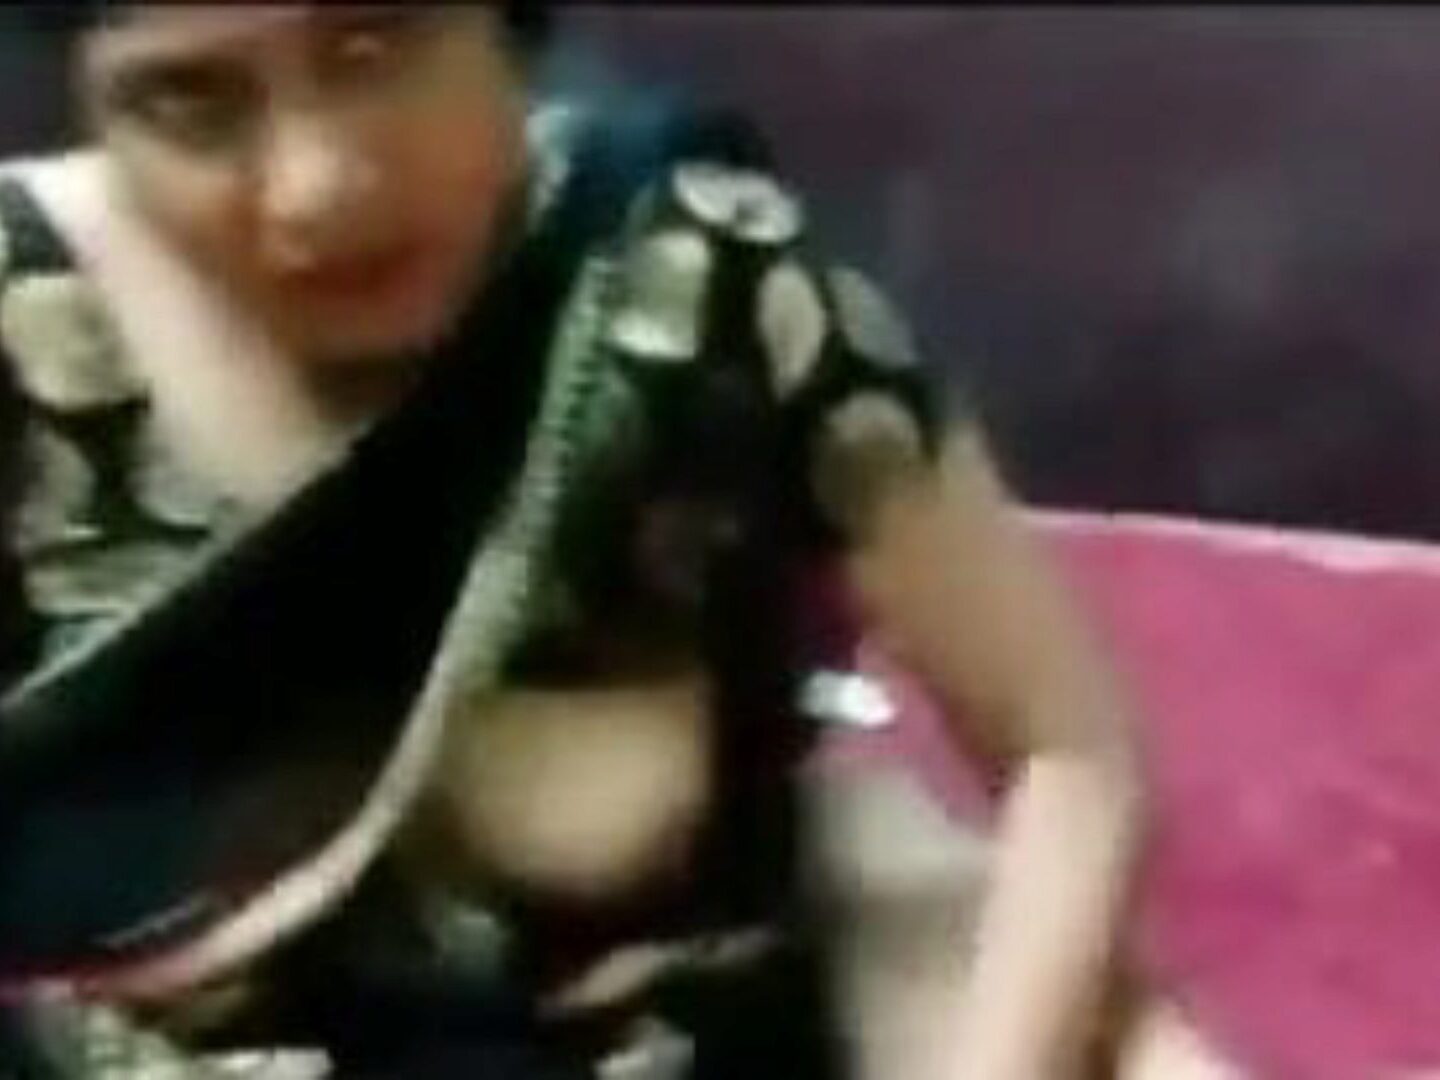 Indianxvideohd - Indian Cute Girl With Forenyear Porn Sex Video - Nude Clap